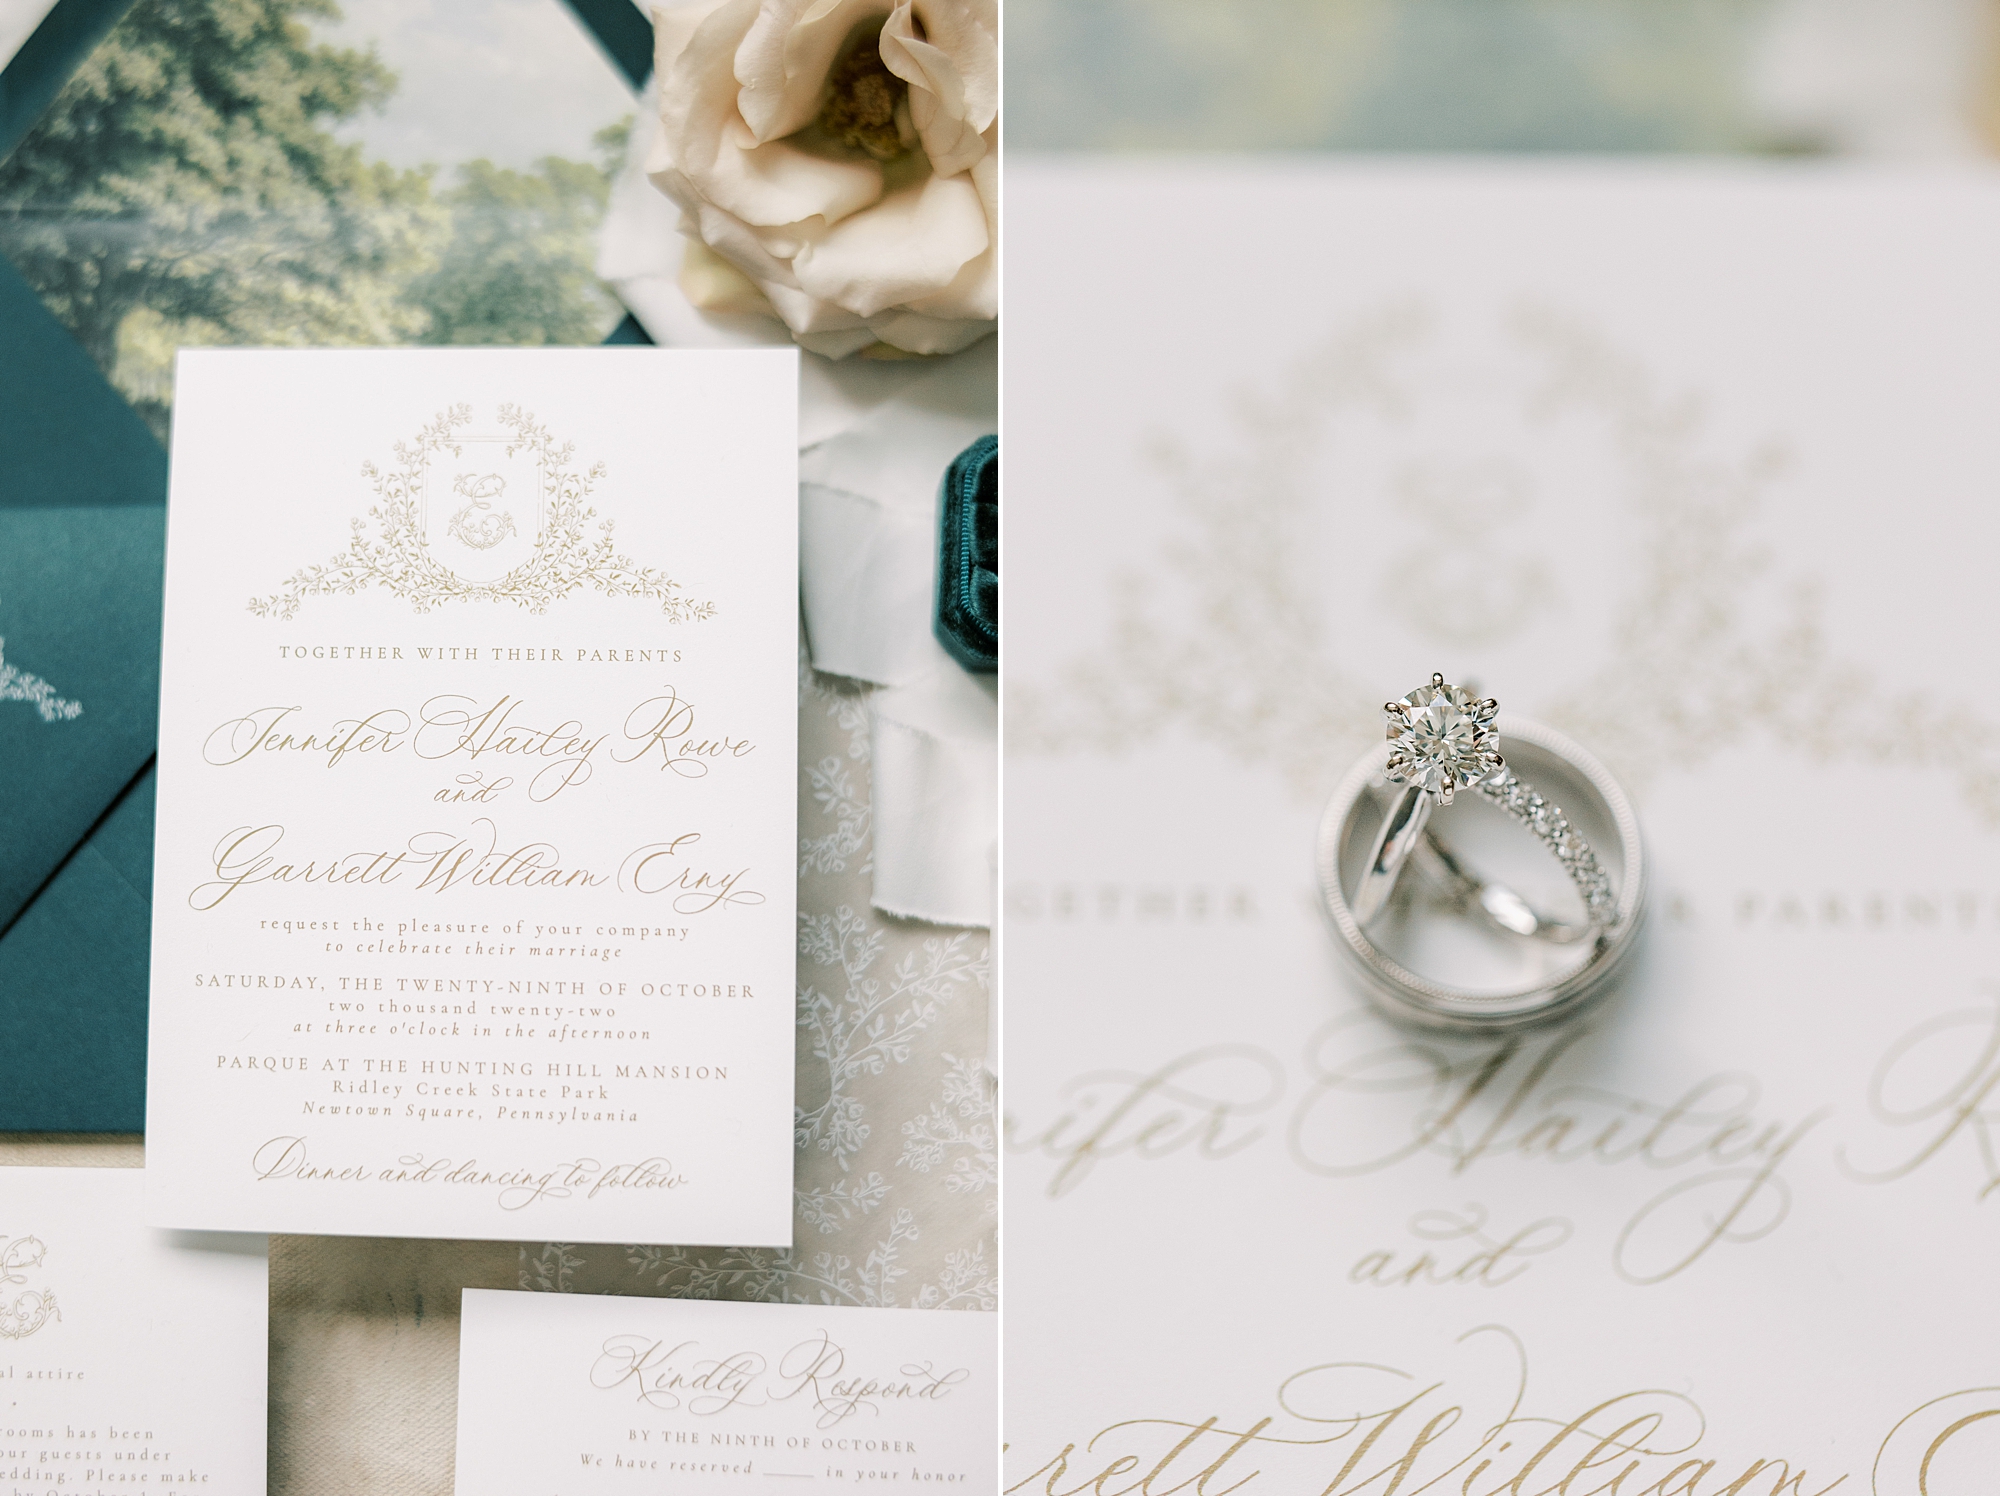 wedding rings rest on stationery with custom crest 